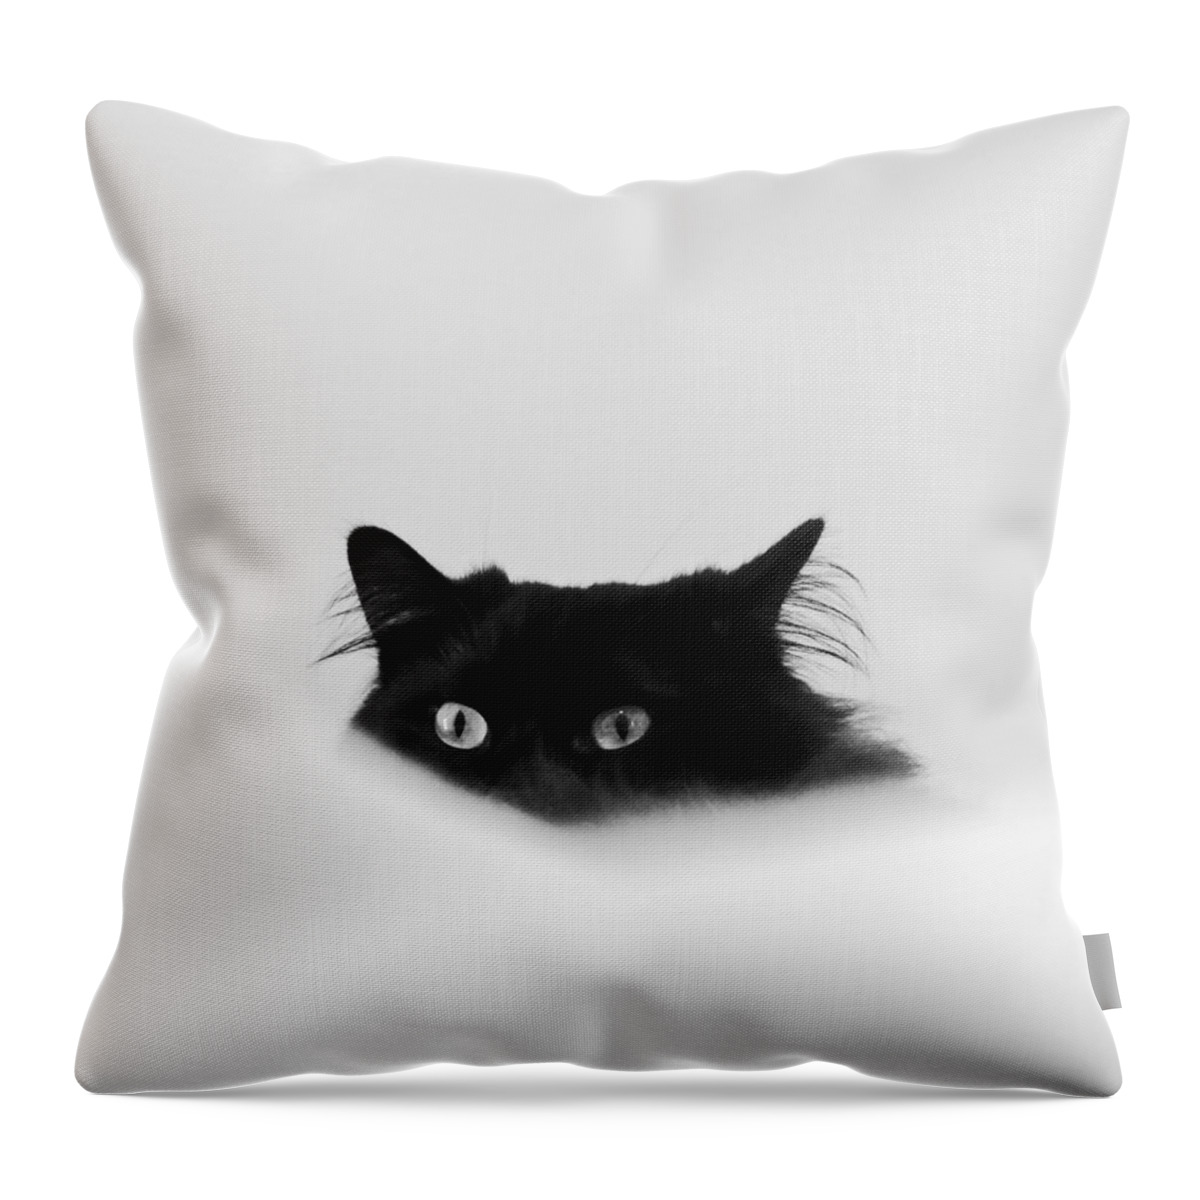 Cat Throw Pillow featuring the digital art Sneaky Cat by Kathleen Illes